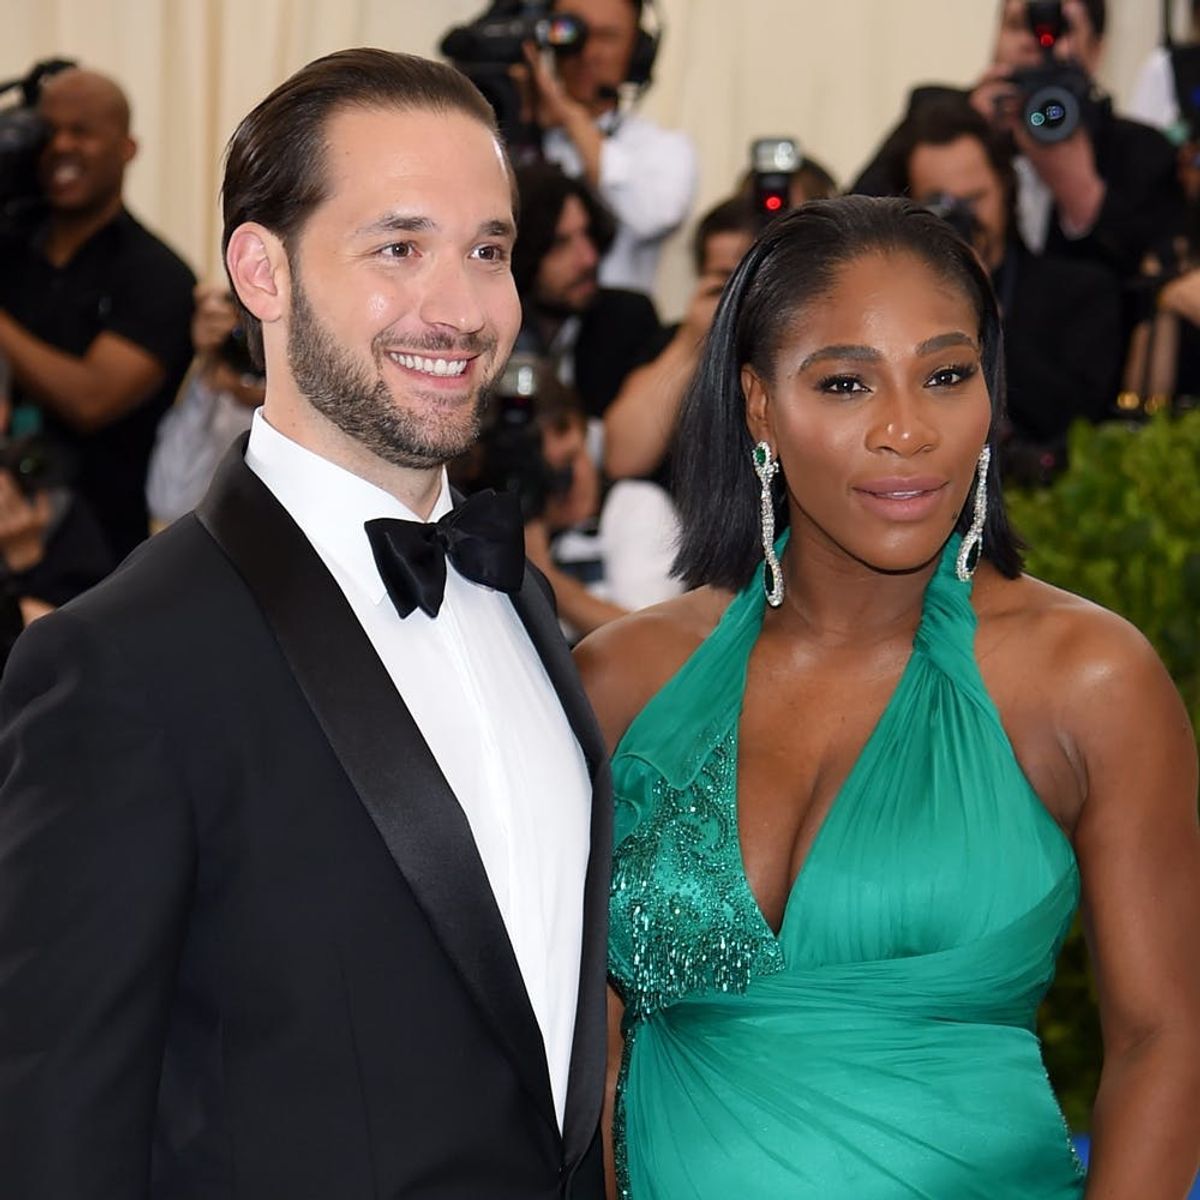 Alexis Ohanian’s Instagram Note to New Wife Serena Williams Will Melt Your Heart